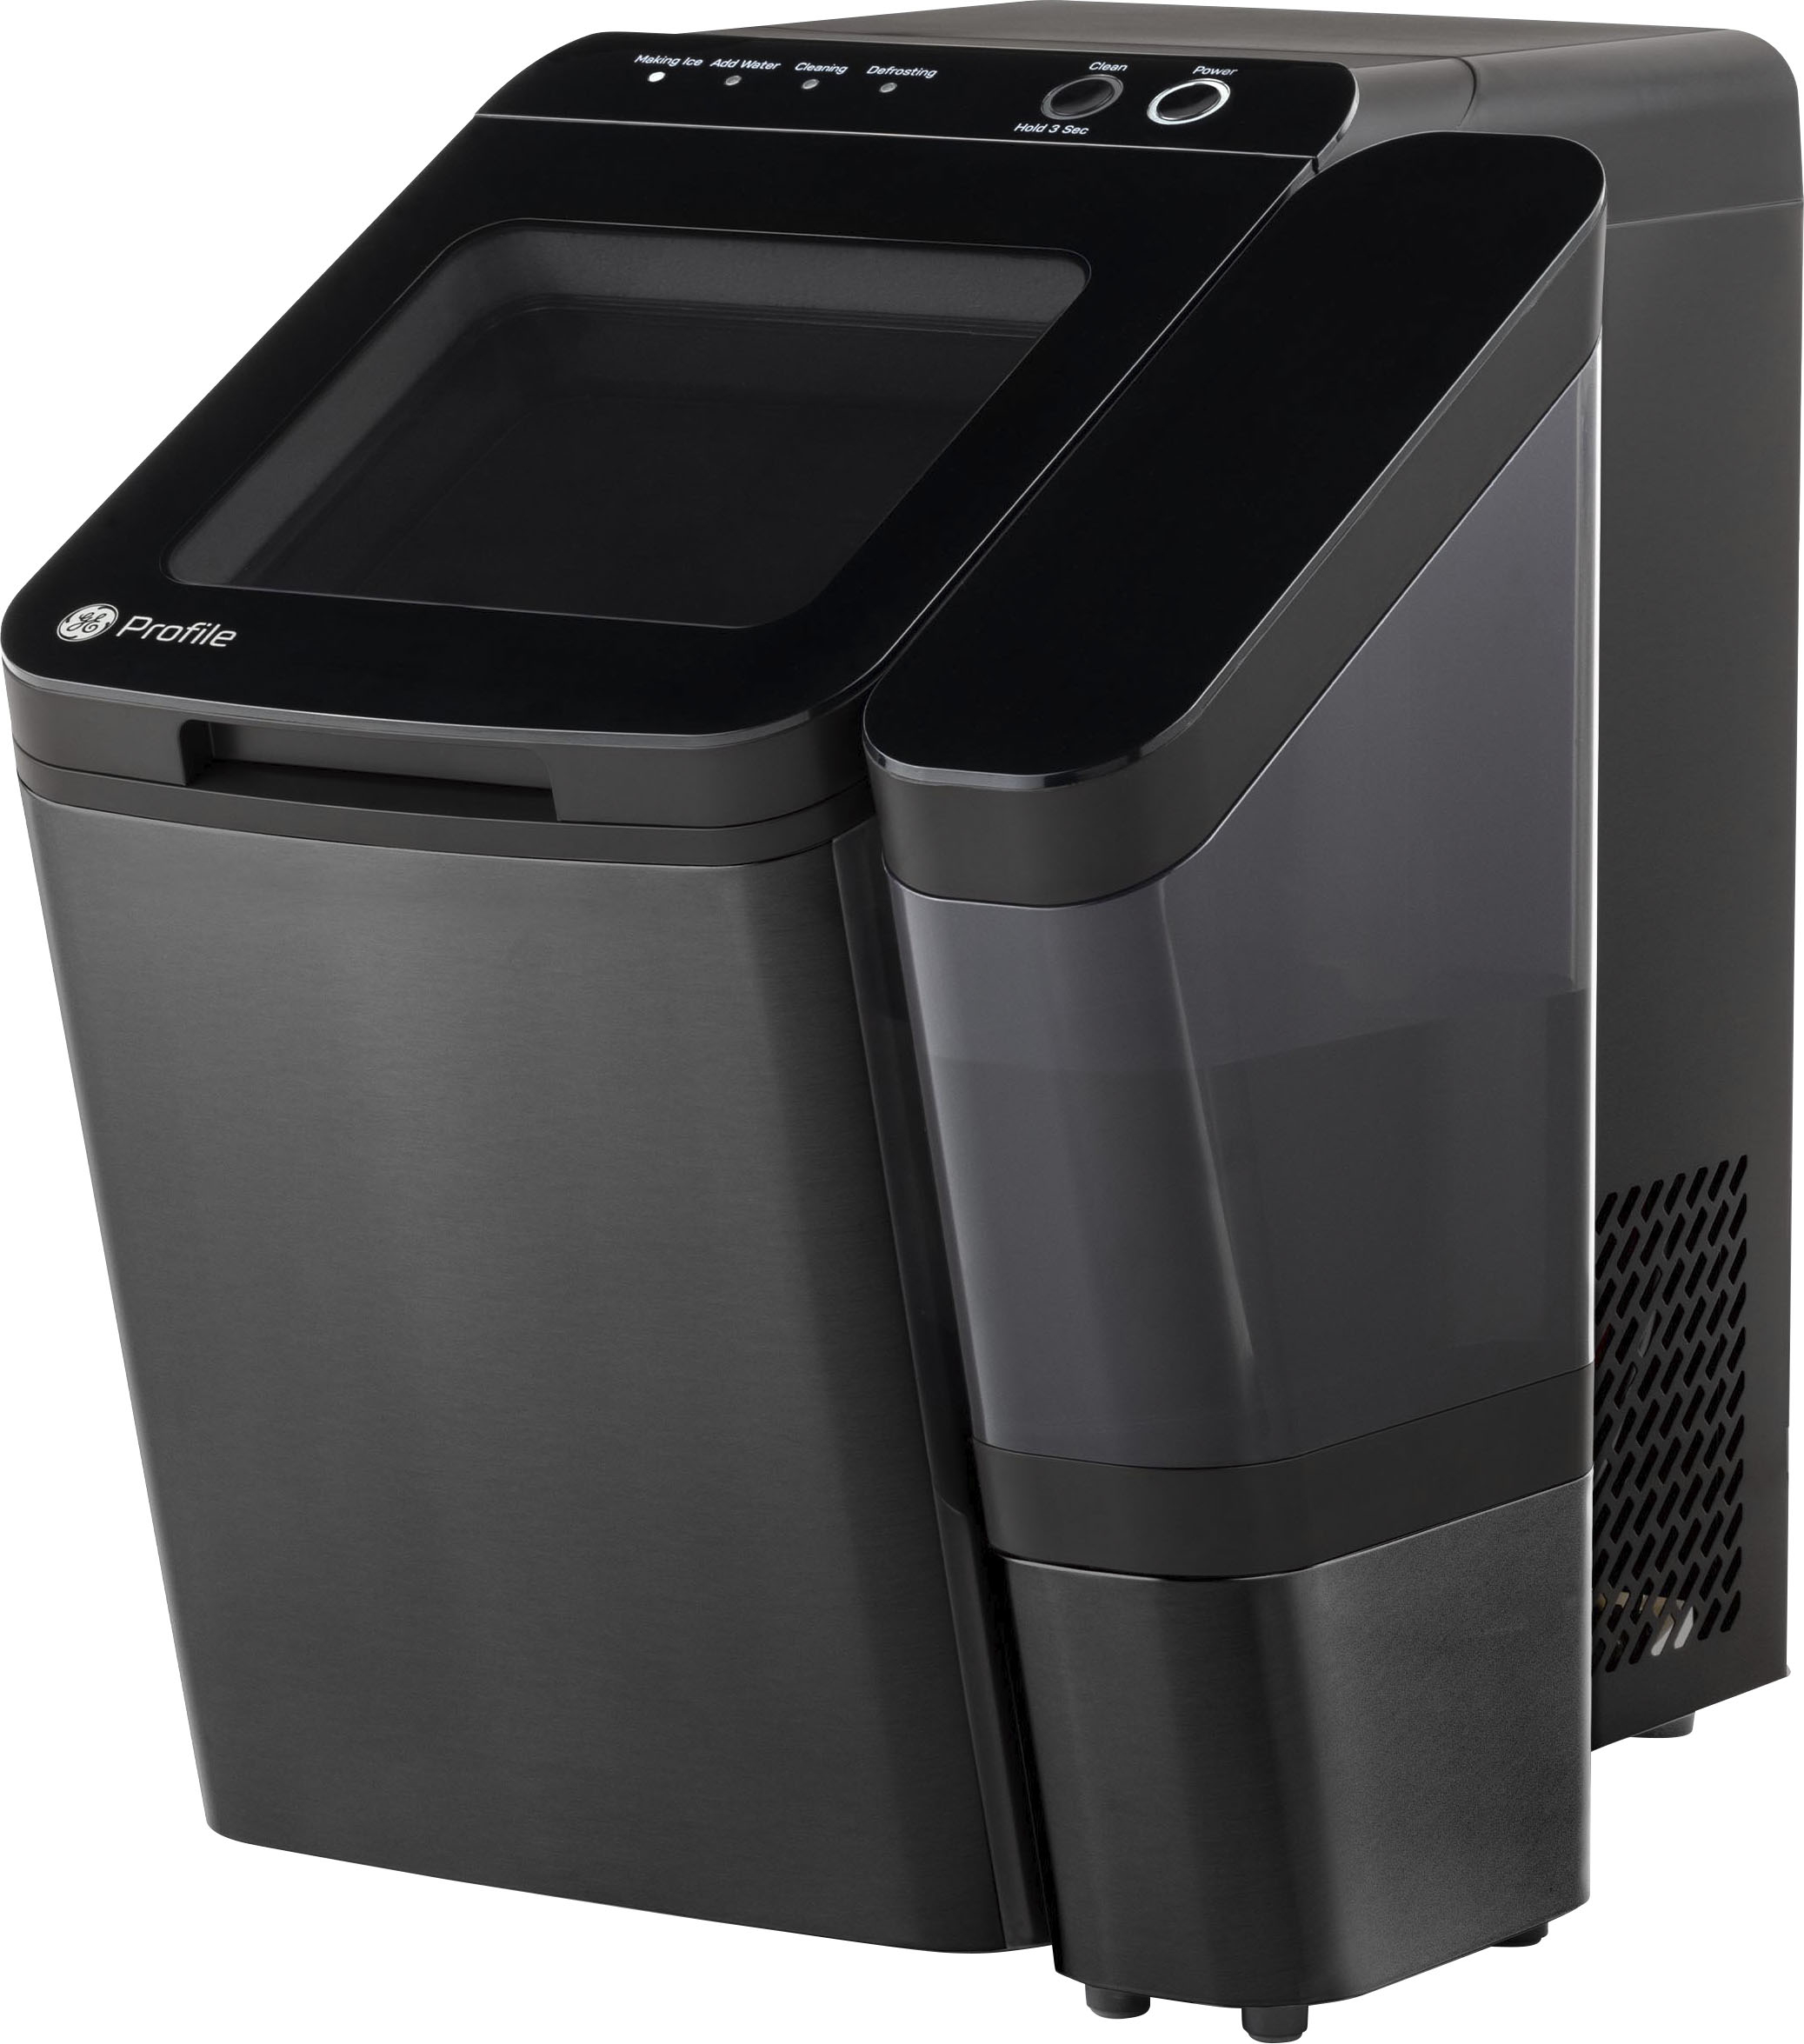 GE Profile - Opal 1.0 Nugget Ice Maker with Side Tank - Black